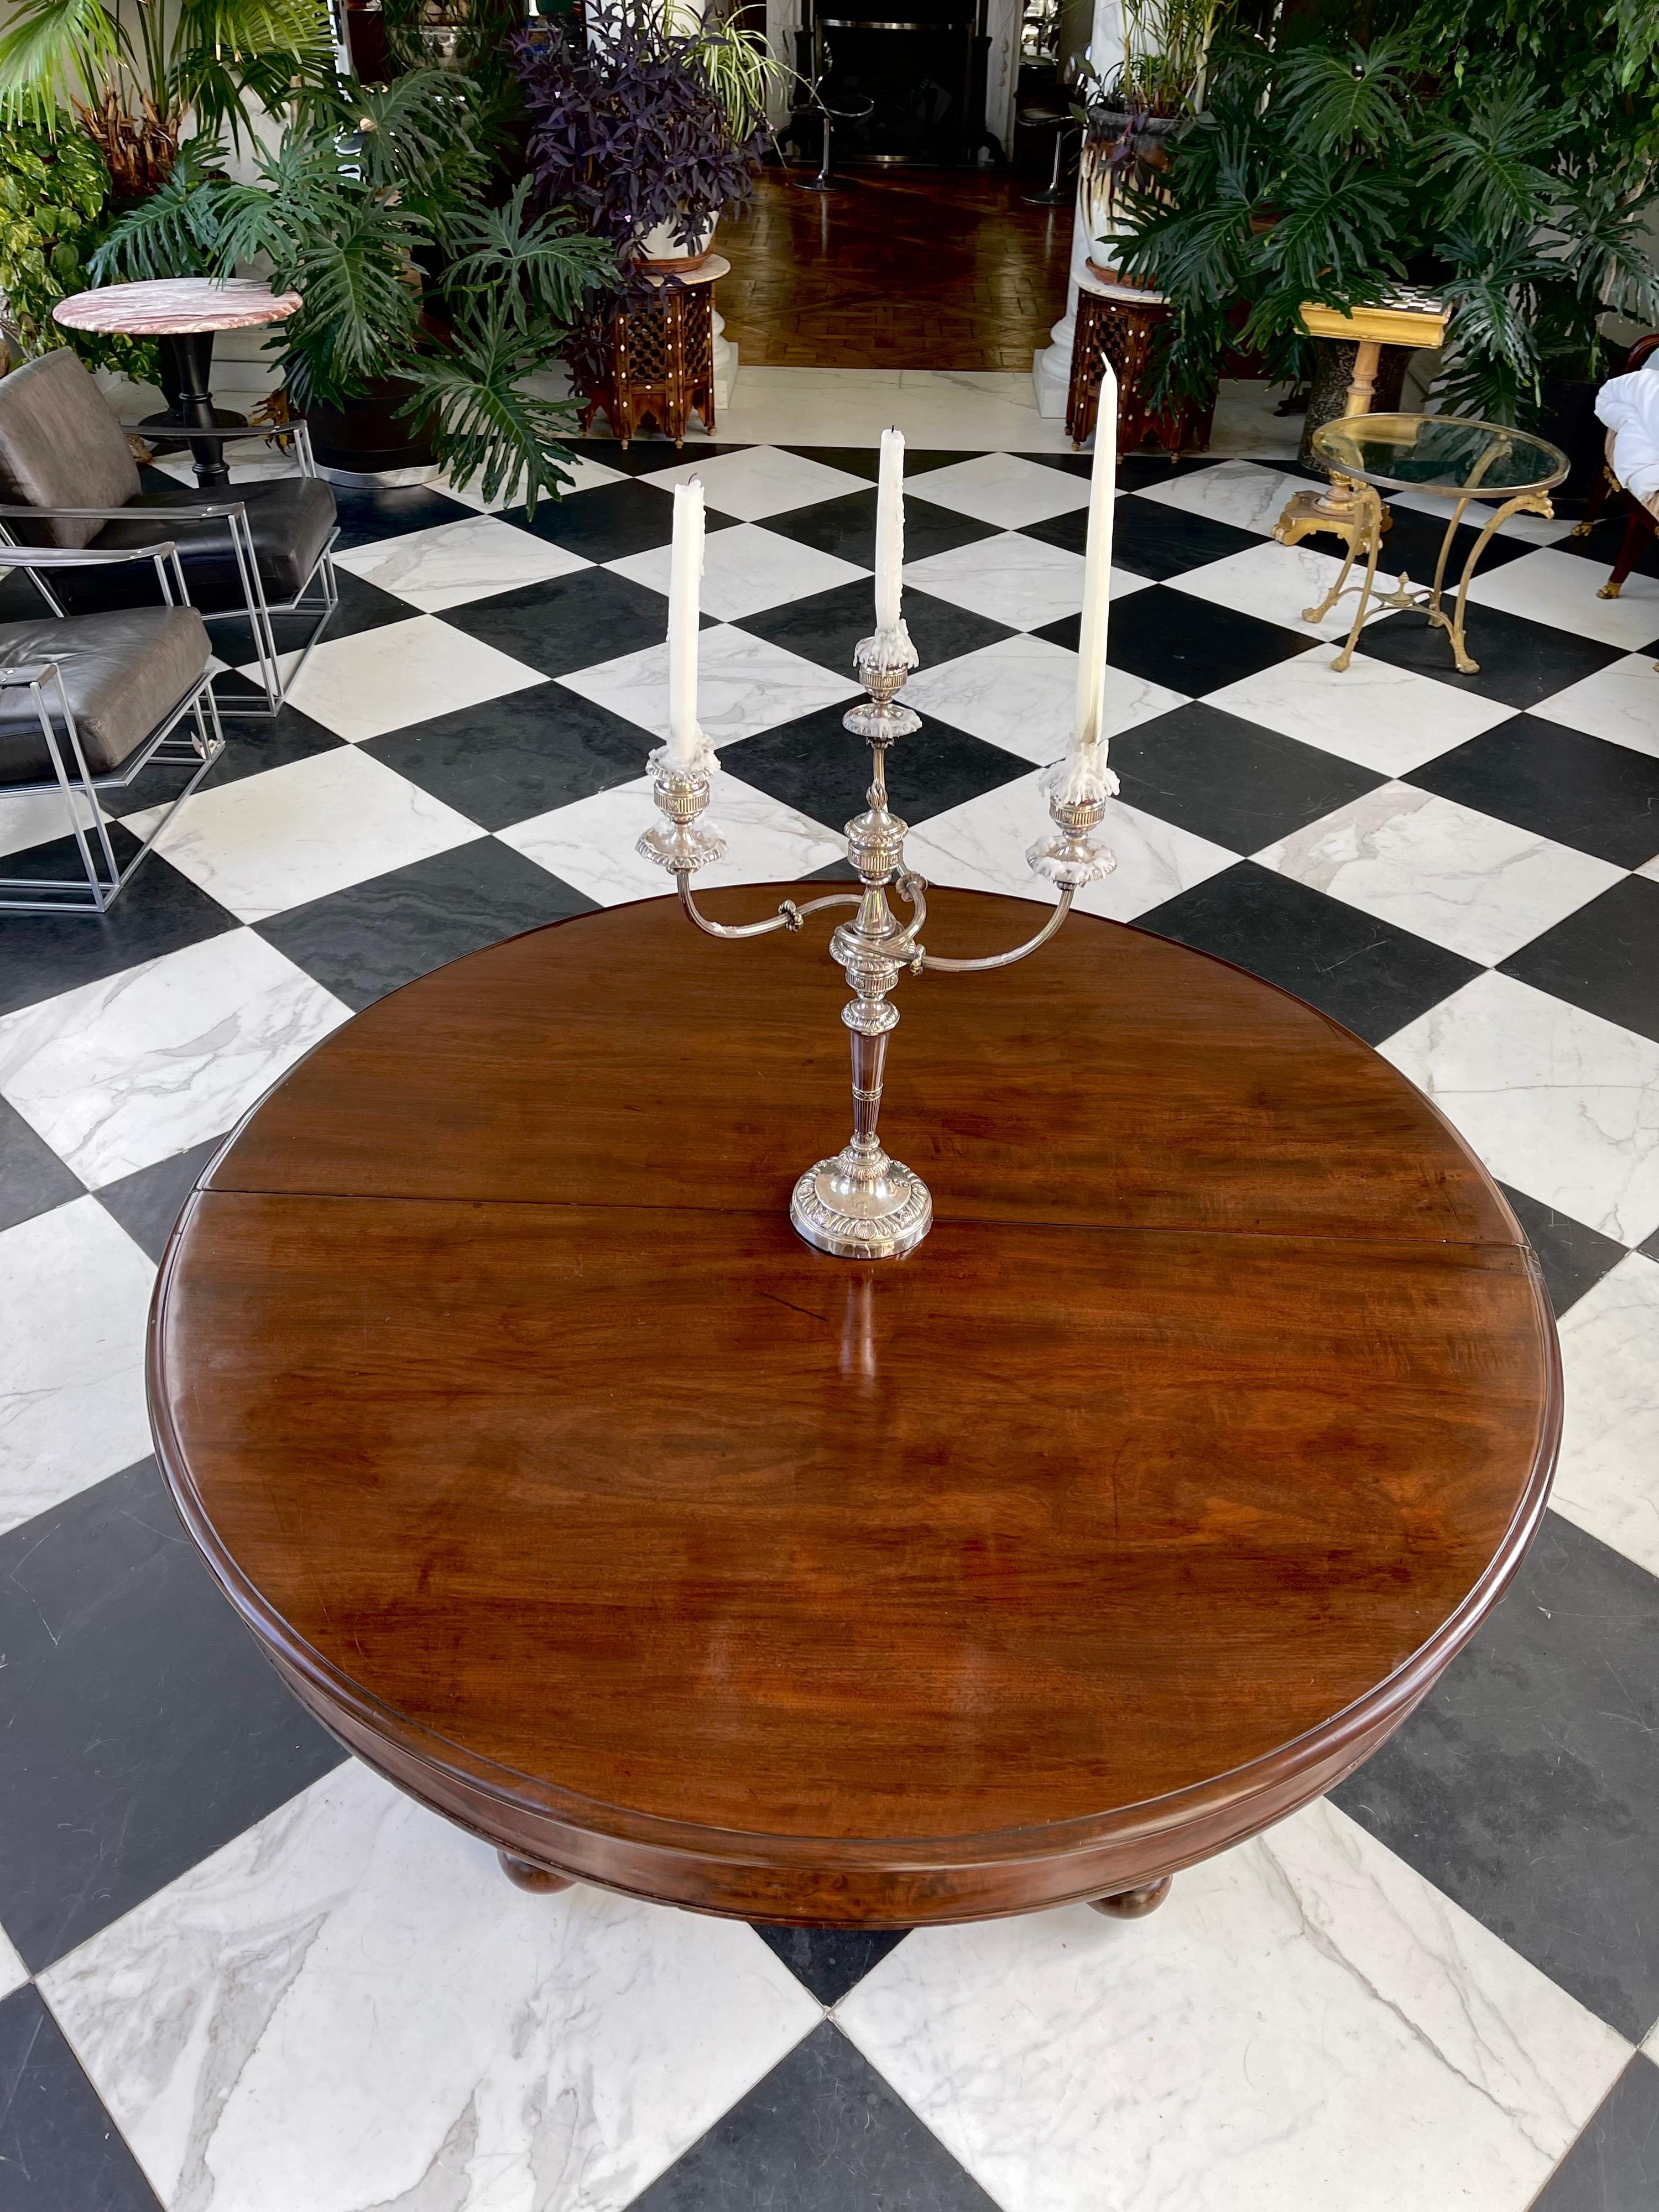 Built to last this 58” round American Federal Cuban mahogany extension Banquet table will seat 18 comfortably. 
Everything about this table is original including hardware. The round table makes a great Center table. It has a bold tapered columnar